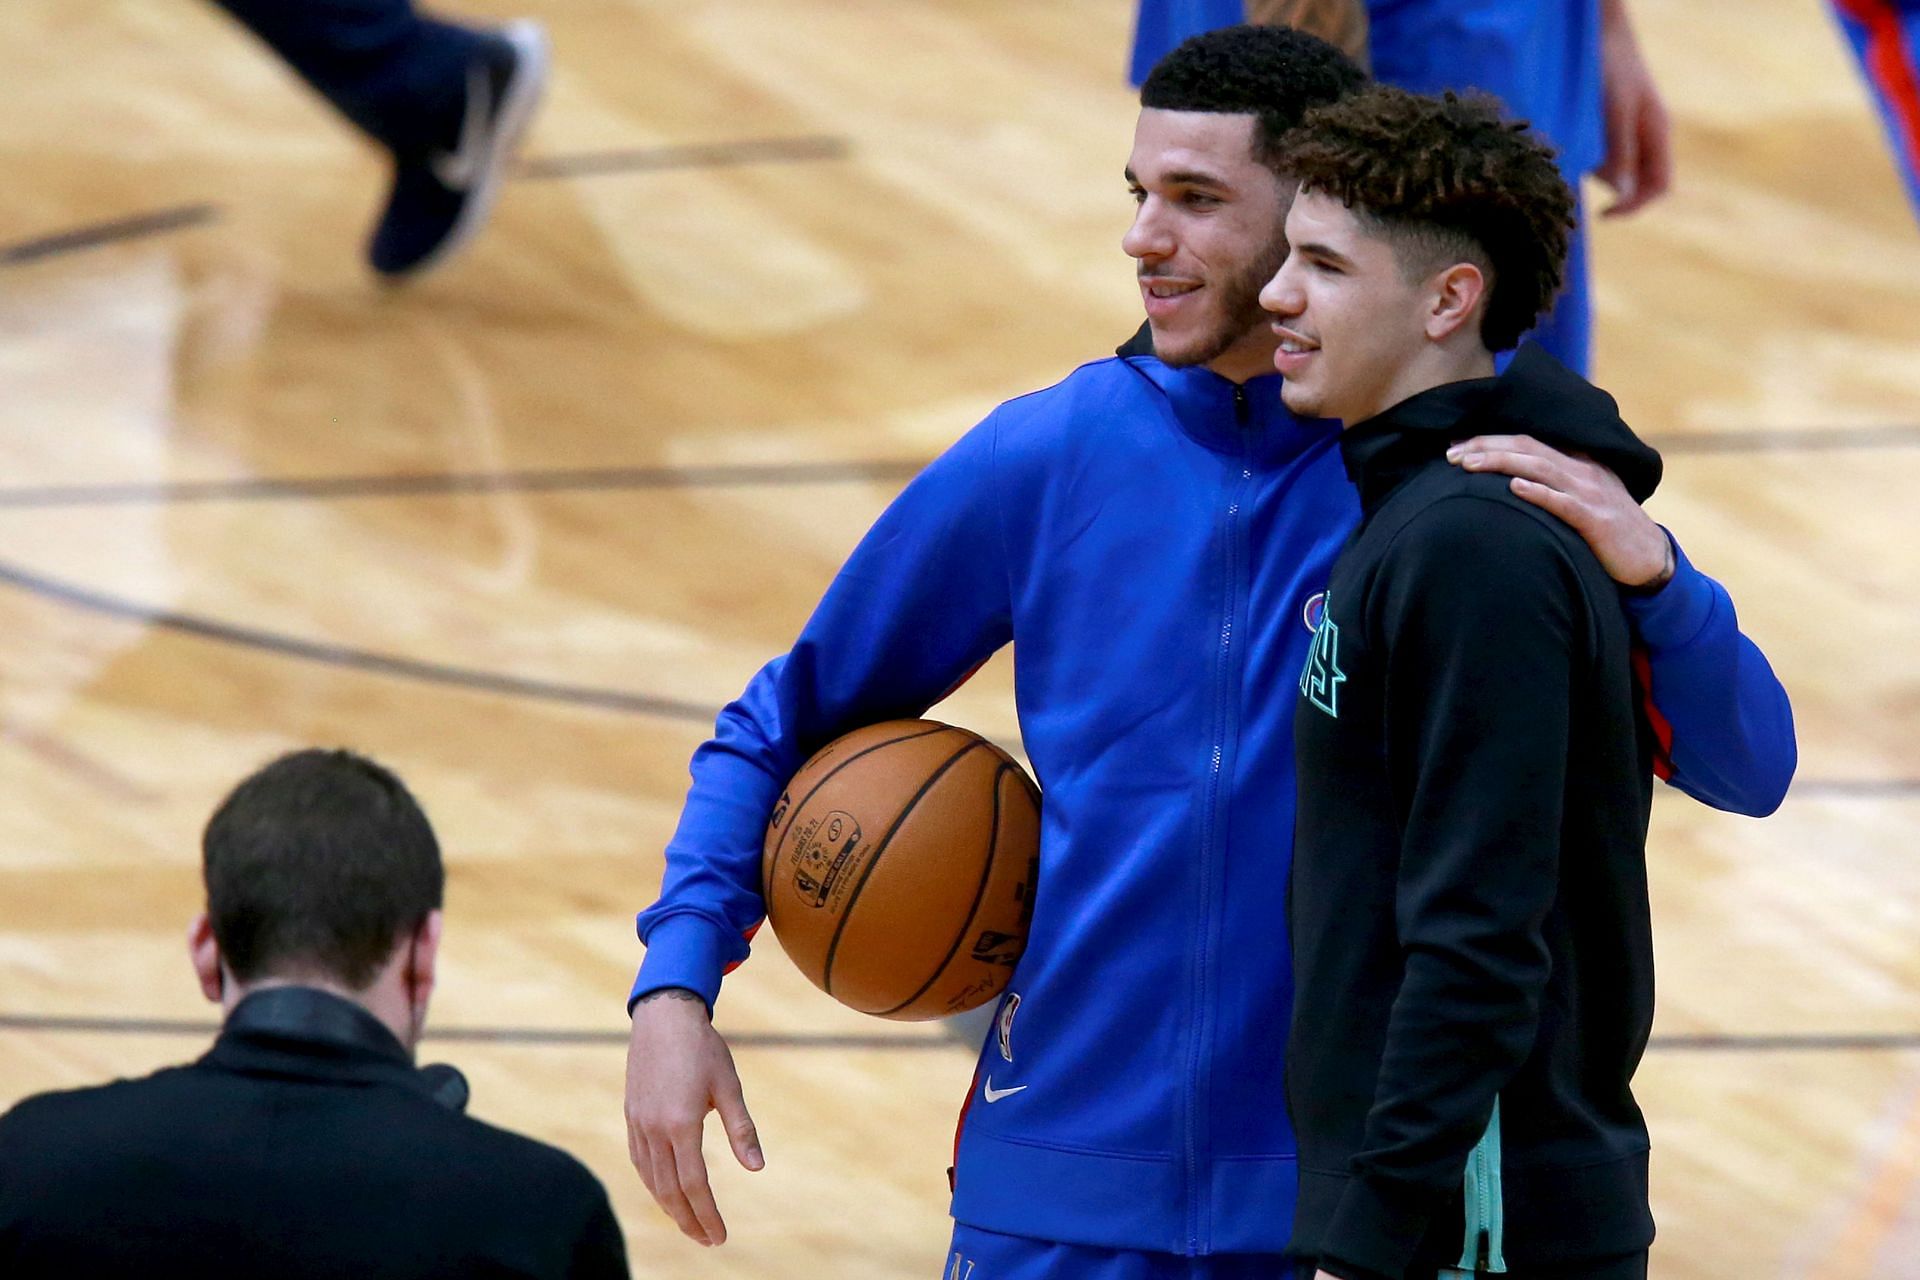 Lonzo Ball and his younger brother, LaMelo Ball